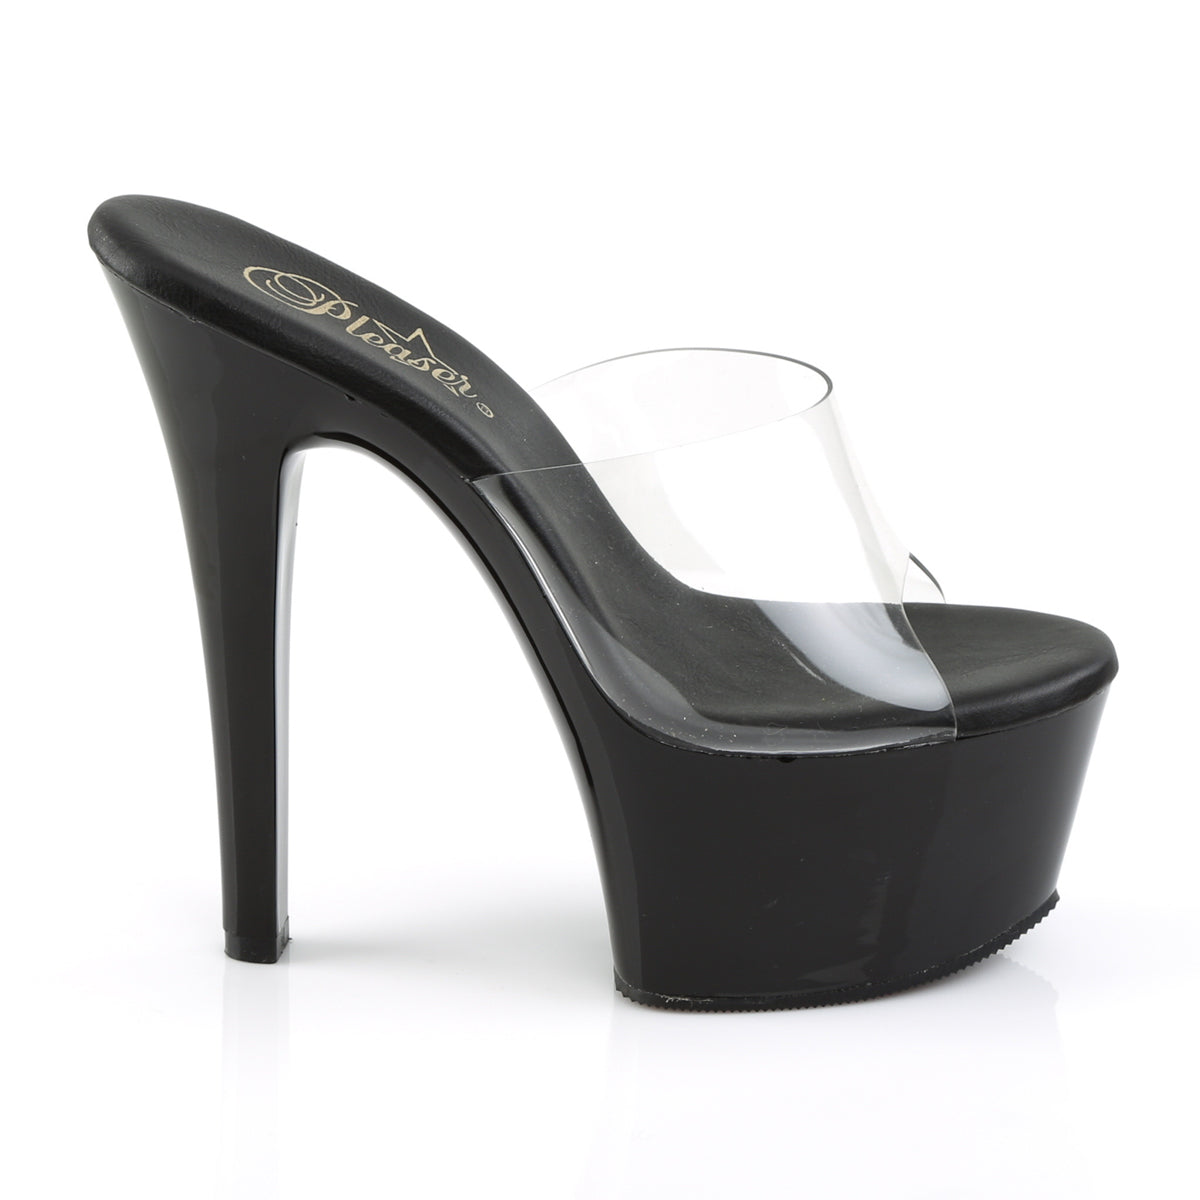 ASPIRE-601 Sexy 6" Heel Clear and Black Pole Dancing Shoes-Pleaser- Sexy Shoes Fetish Heels